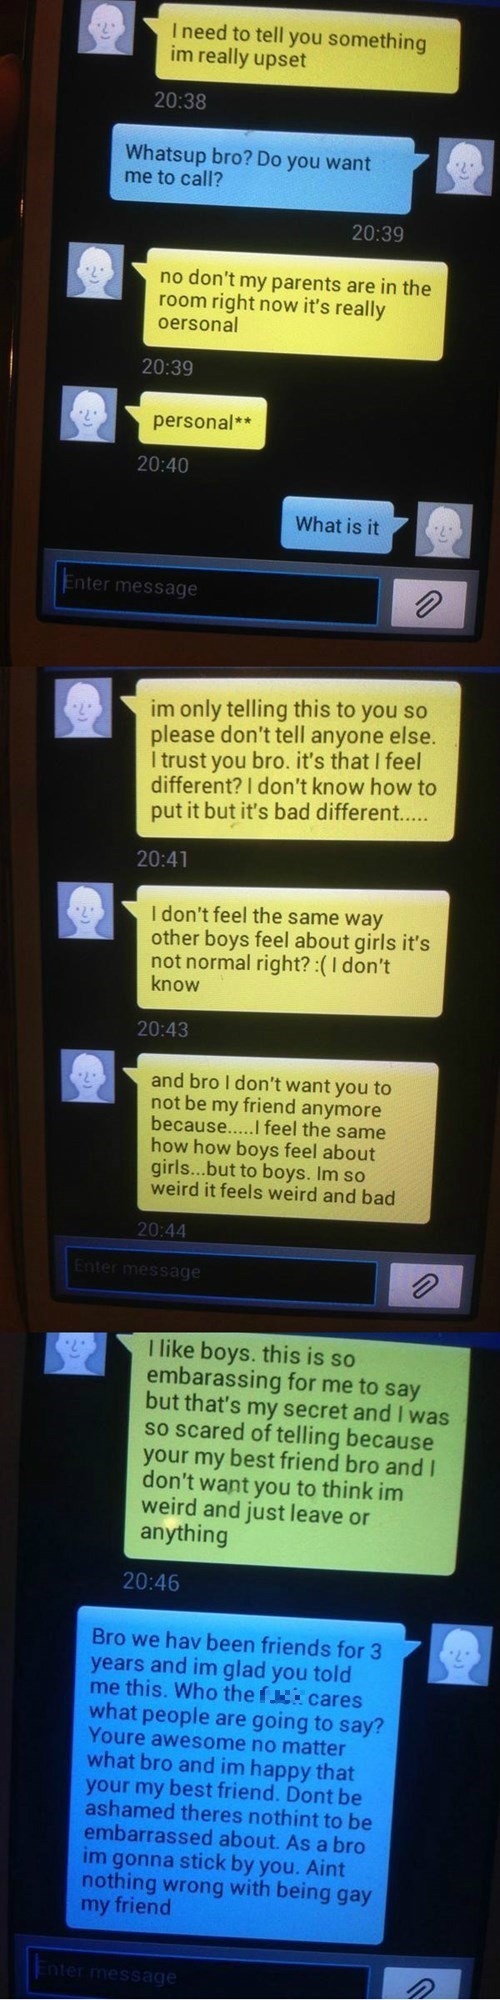 This Conversation Between a 13-Year-Old Coming Out to His Best Friend is Absolutely Heartwarming